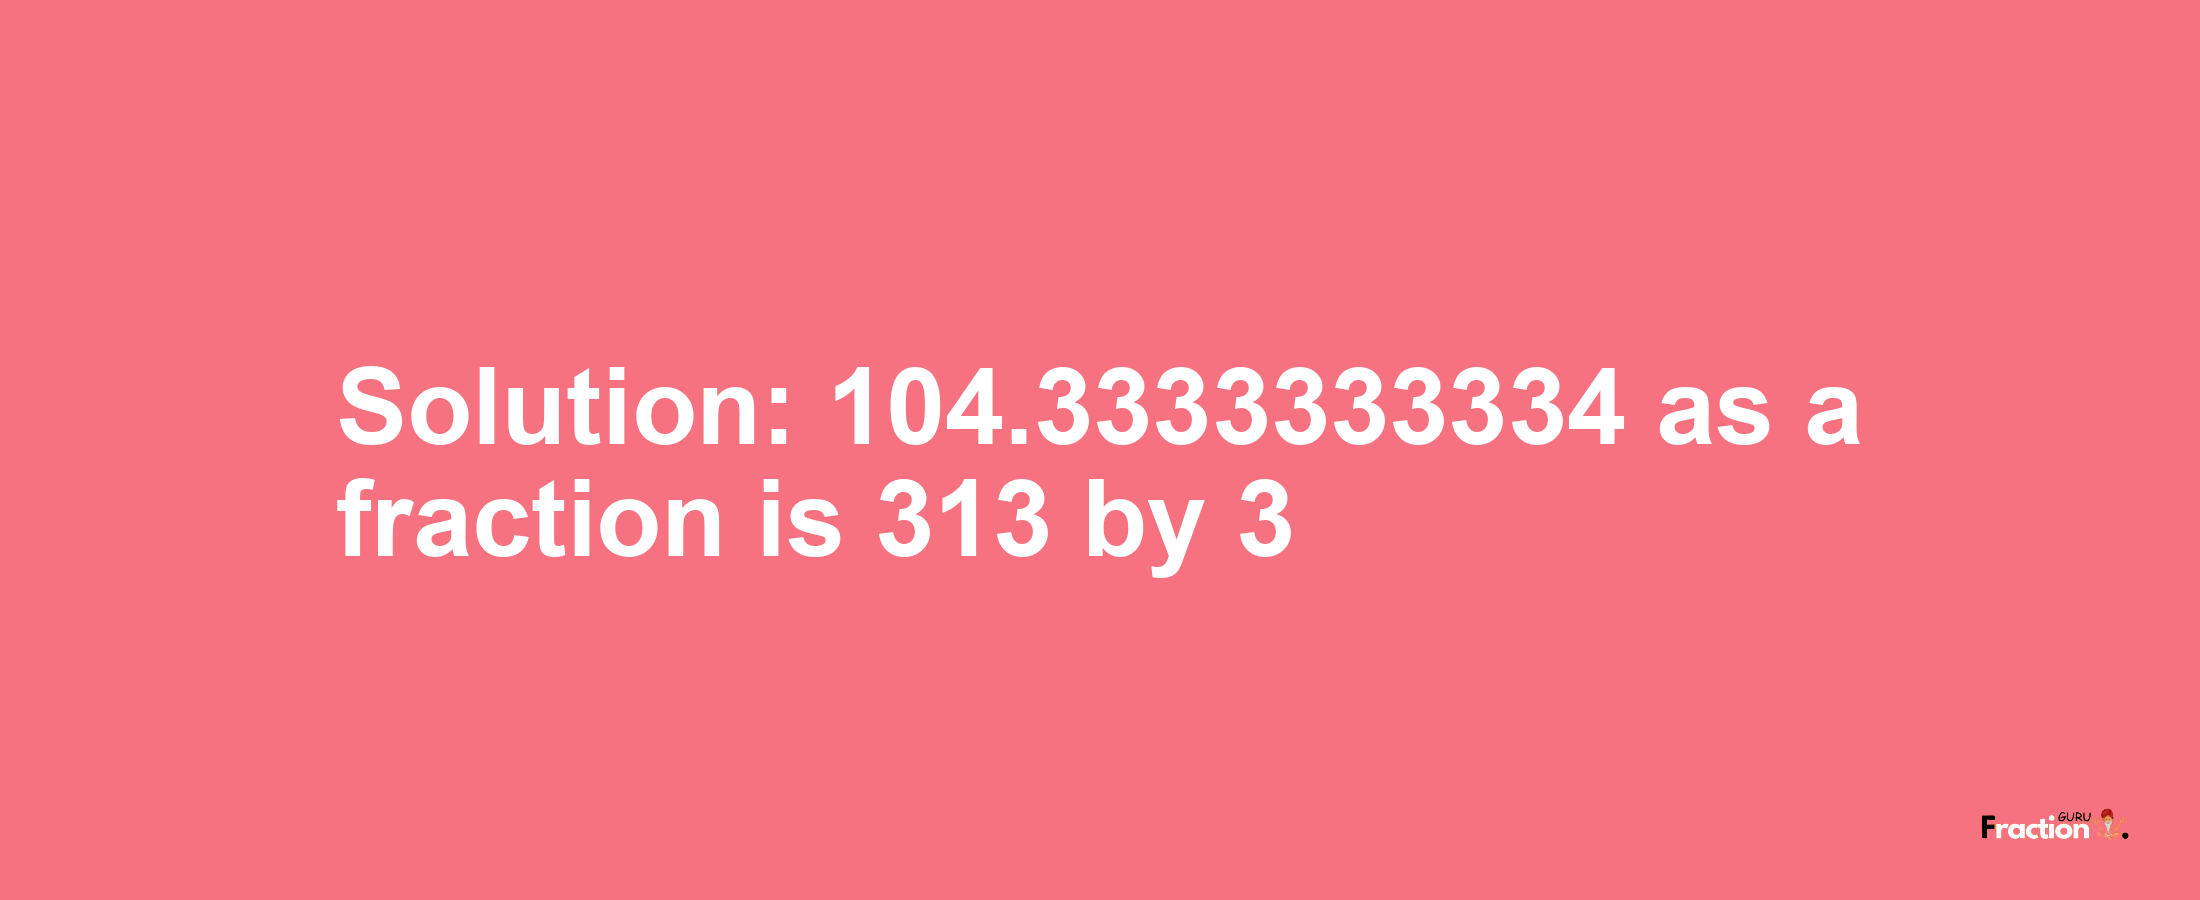 Solution:104.3333333334 as a fraction is 313/3